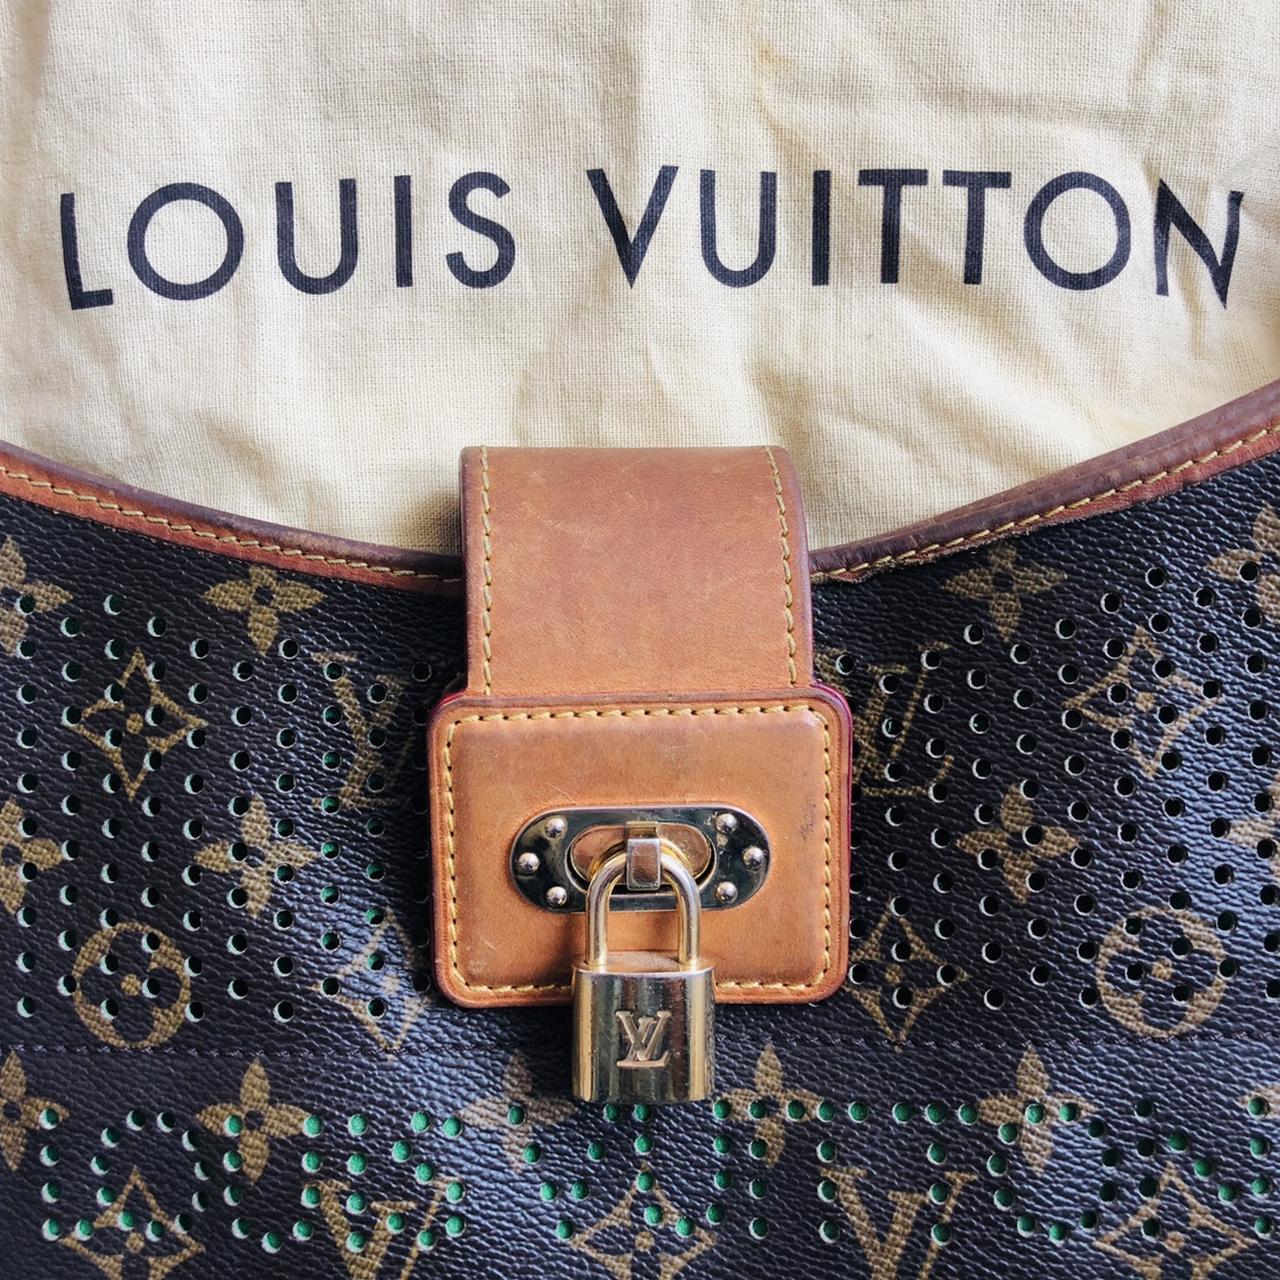 vuitton monogram perforated musette